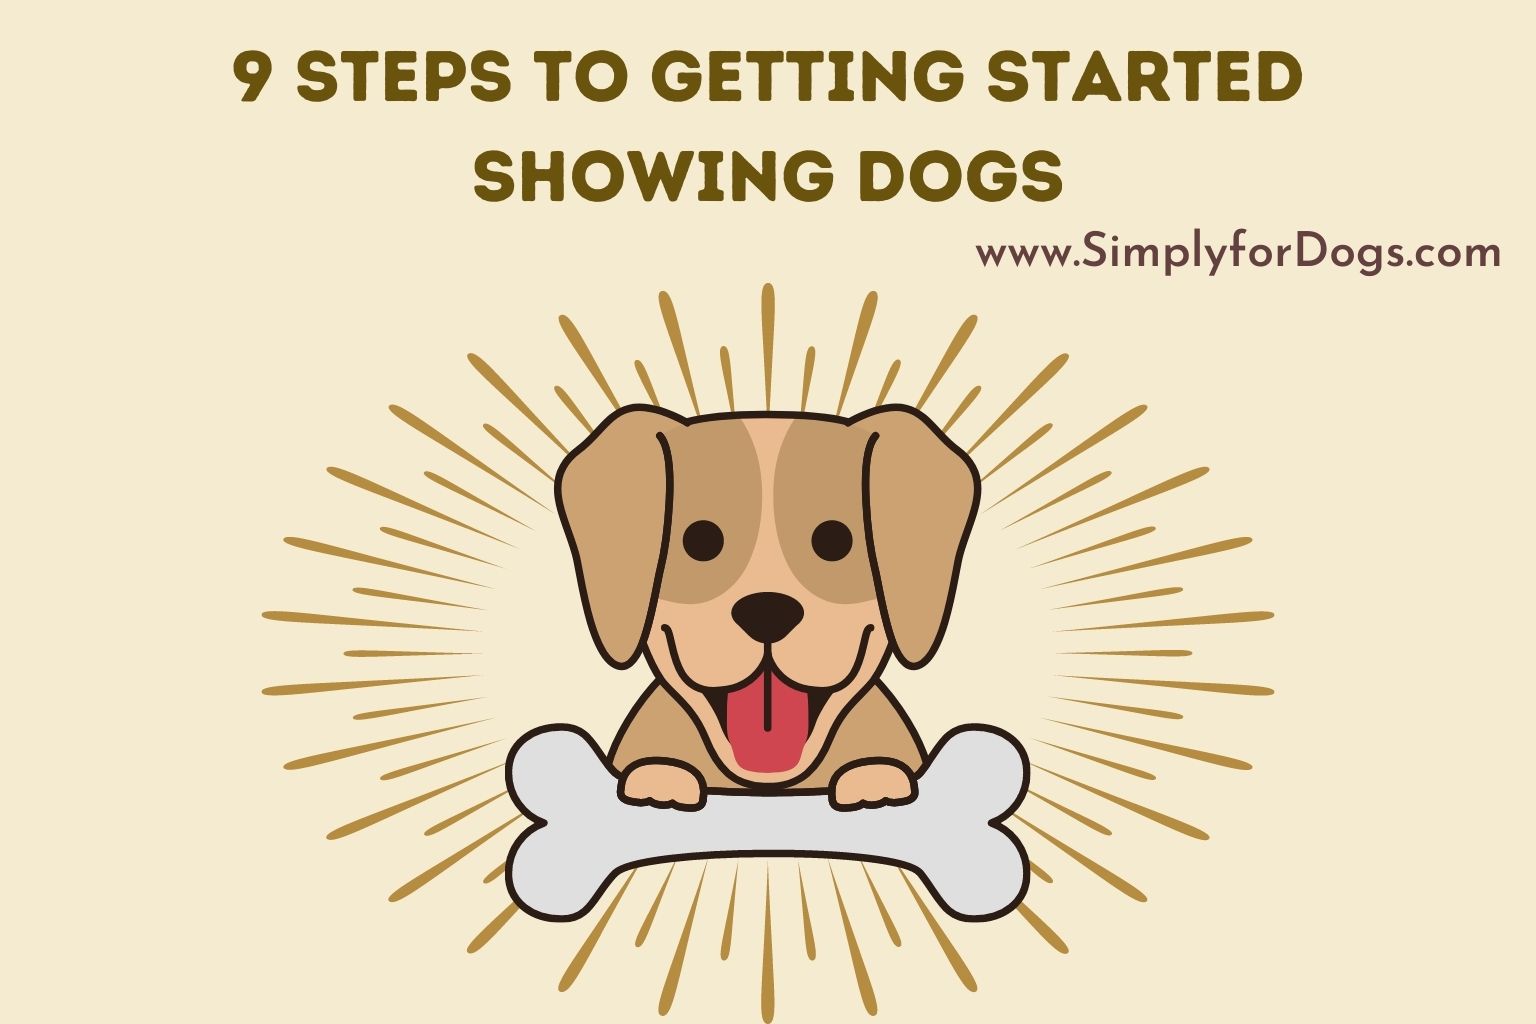 9 Steps to Getting Started Showing Dogs